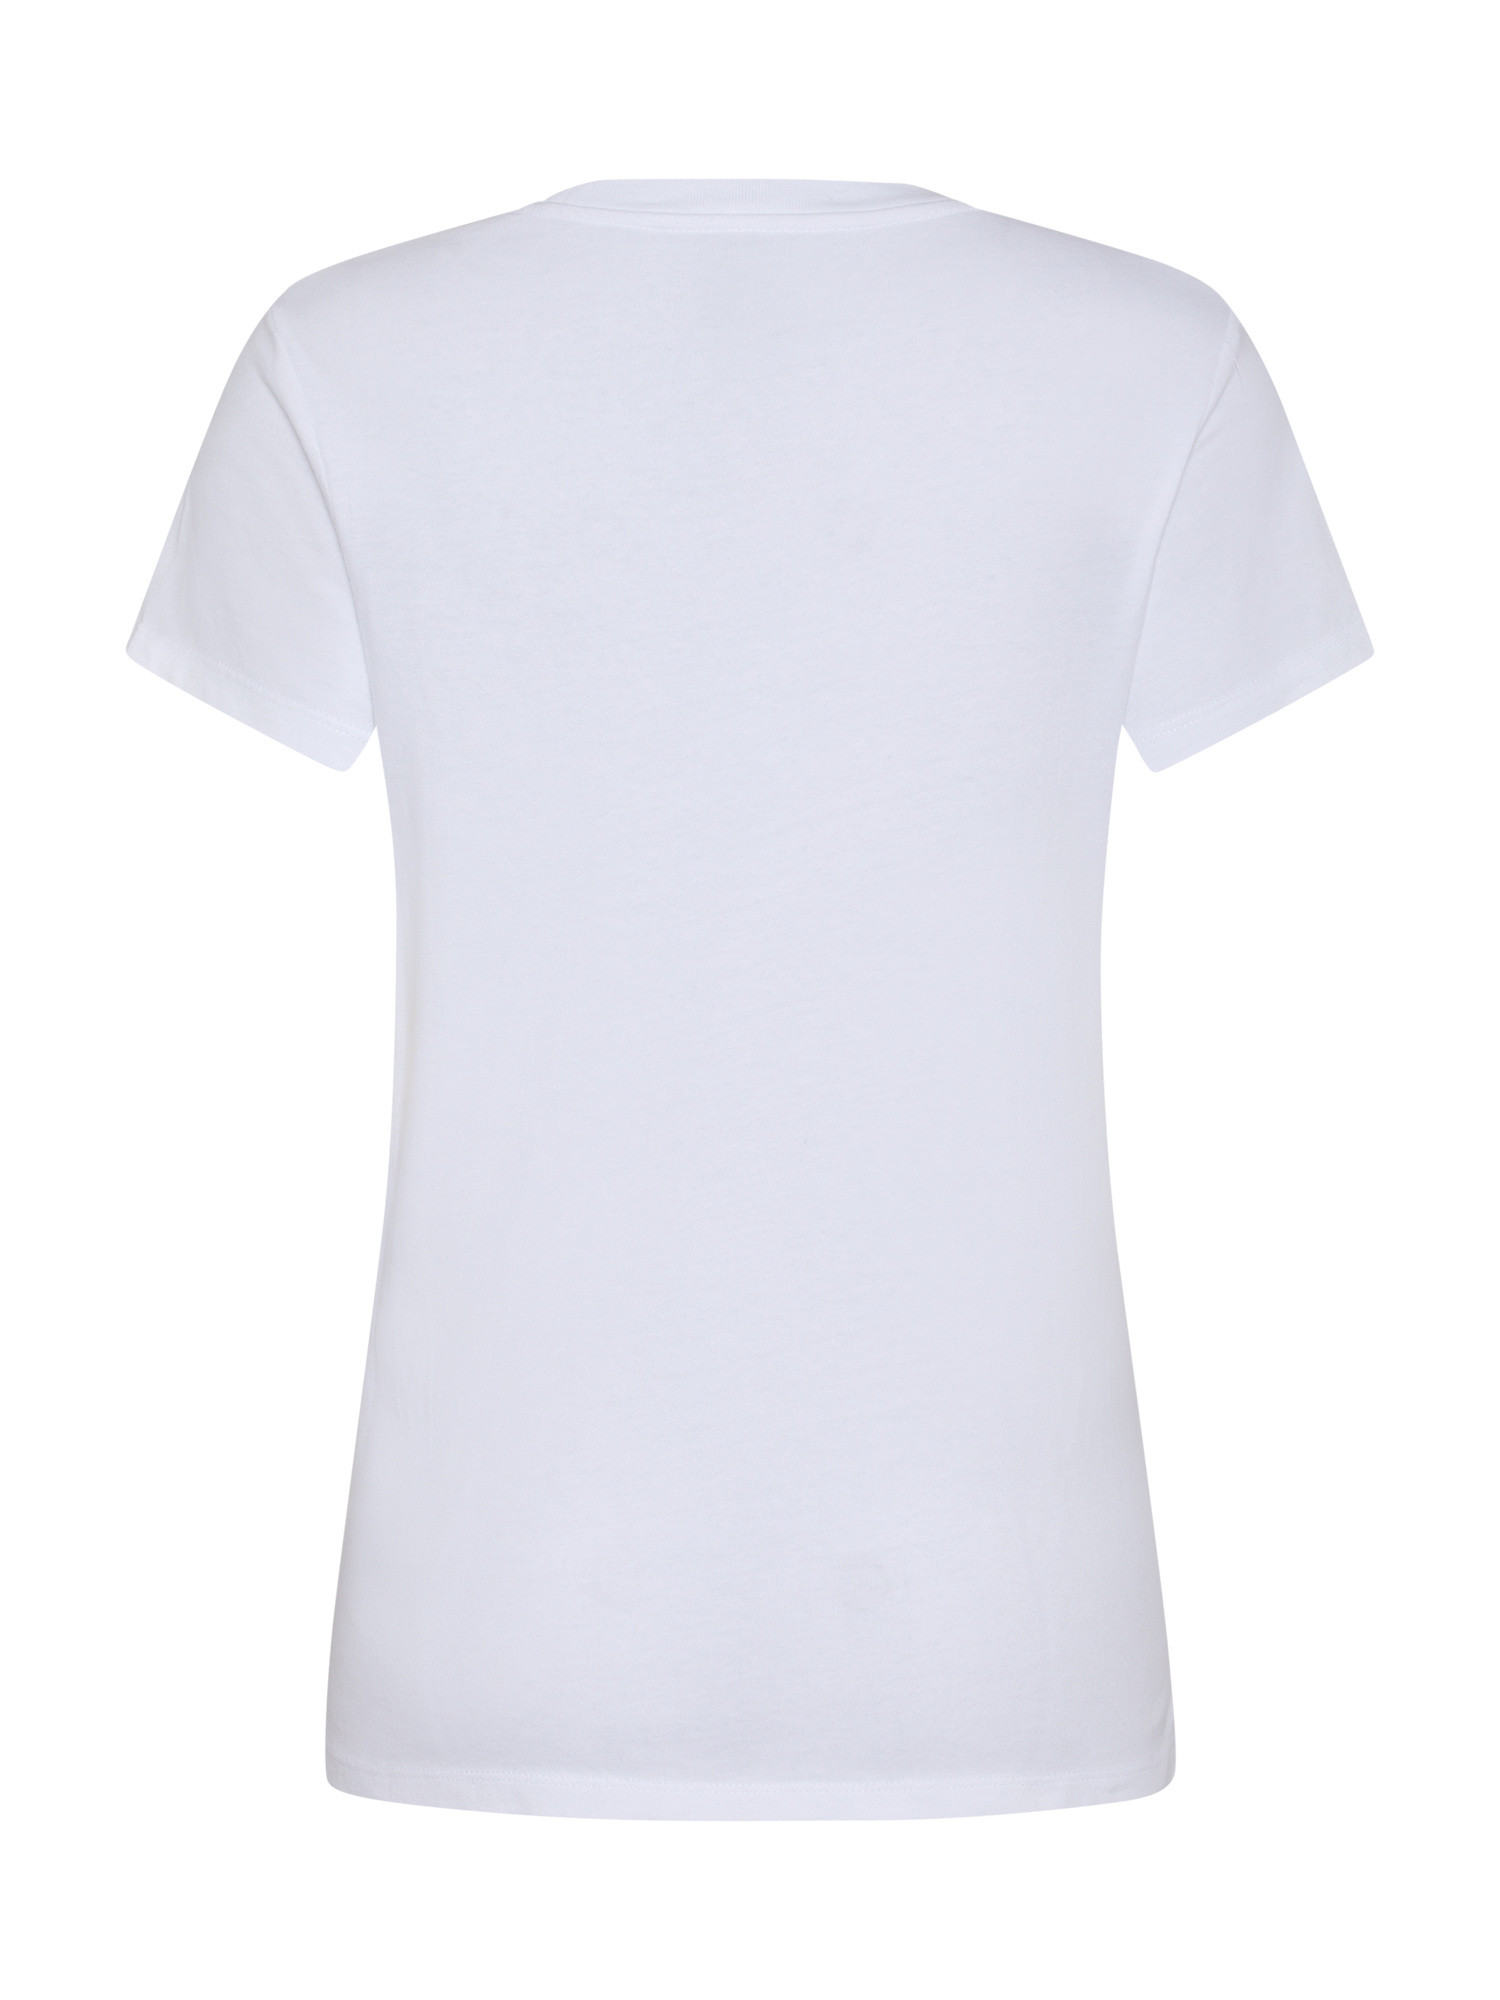 Levi's - T-shirt in cotone con logo, Bianco, large image number 1